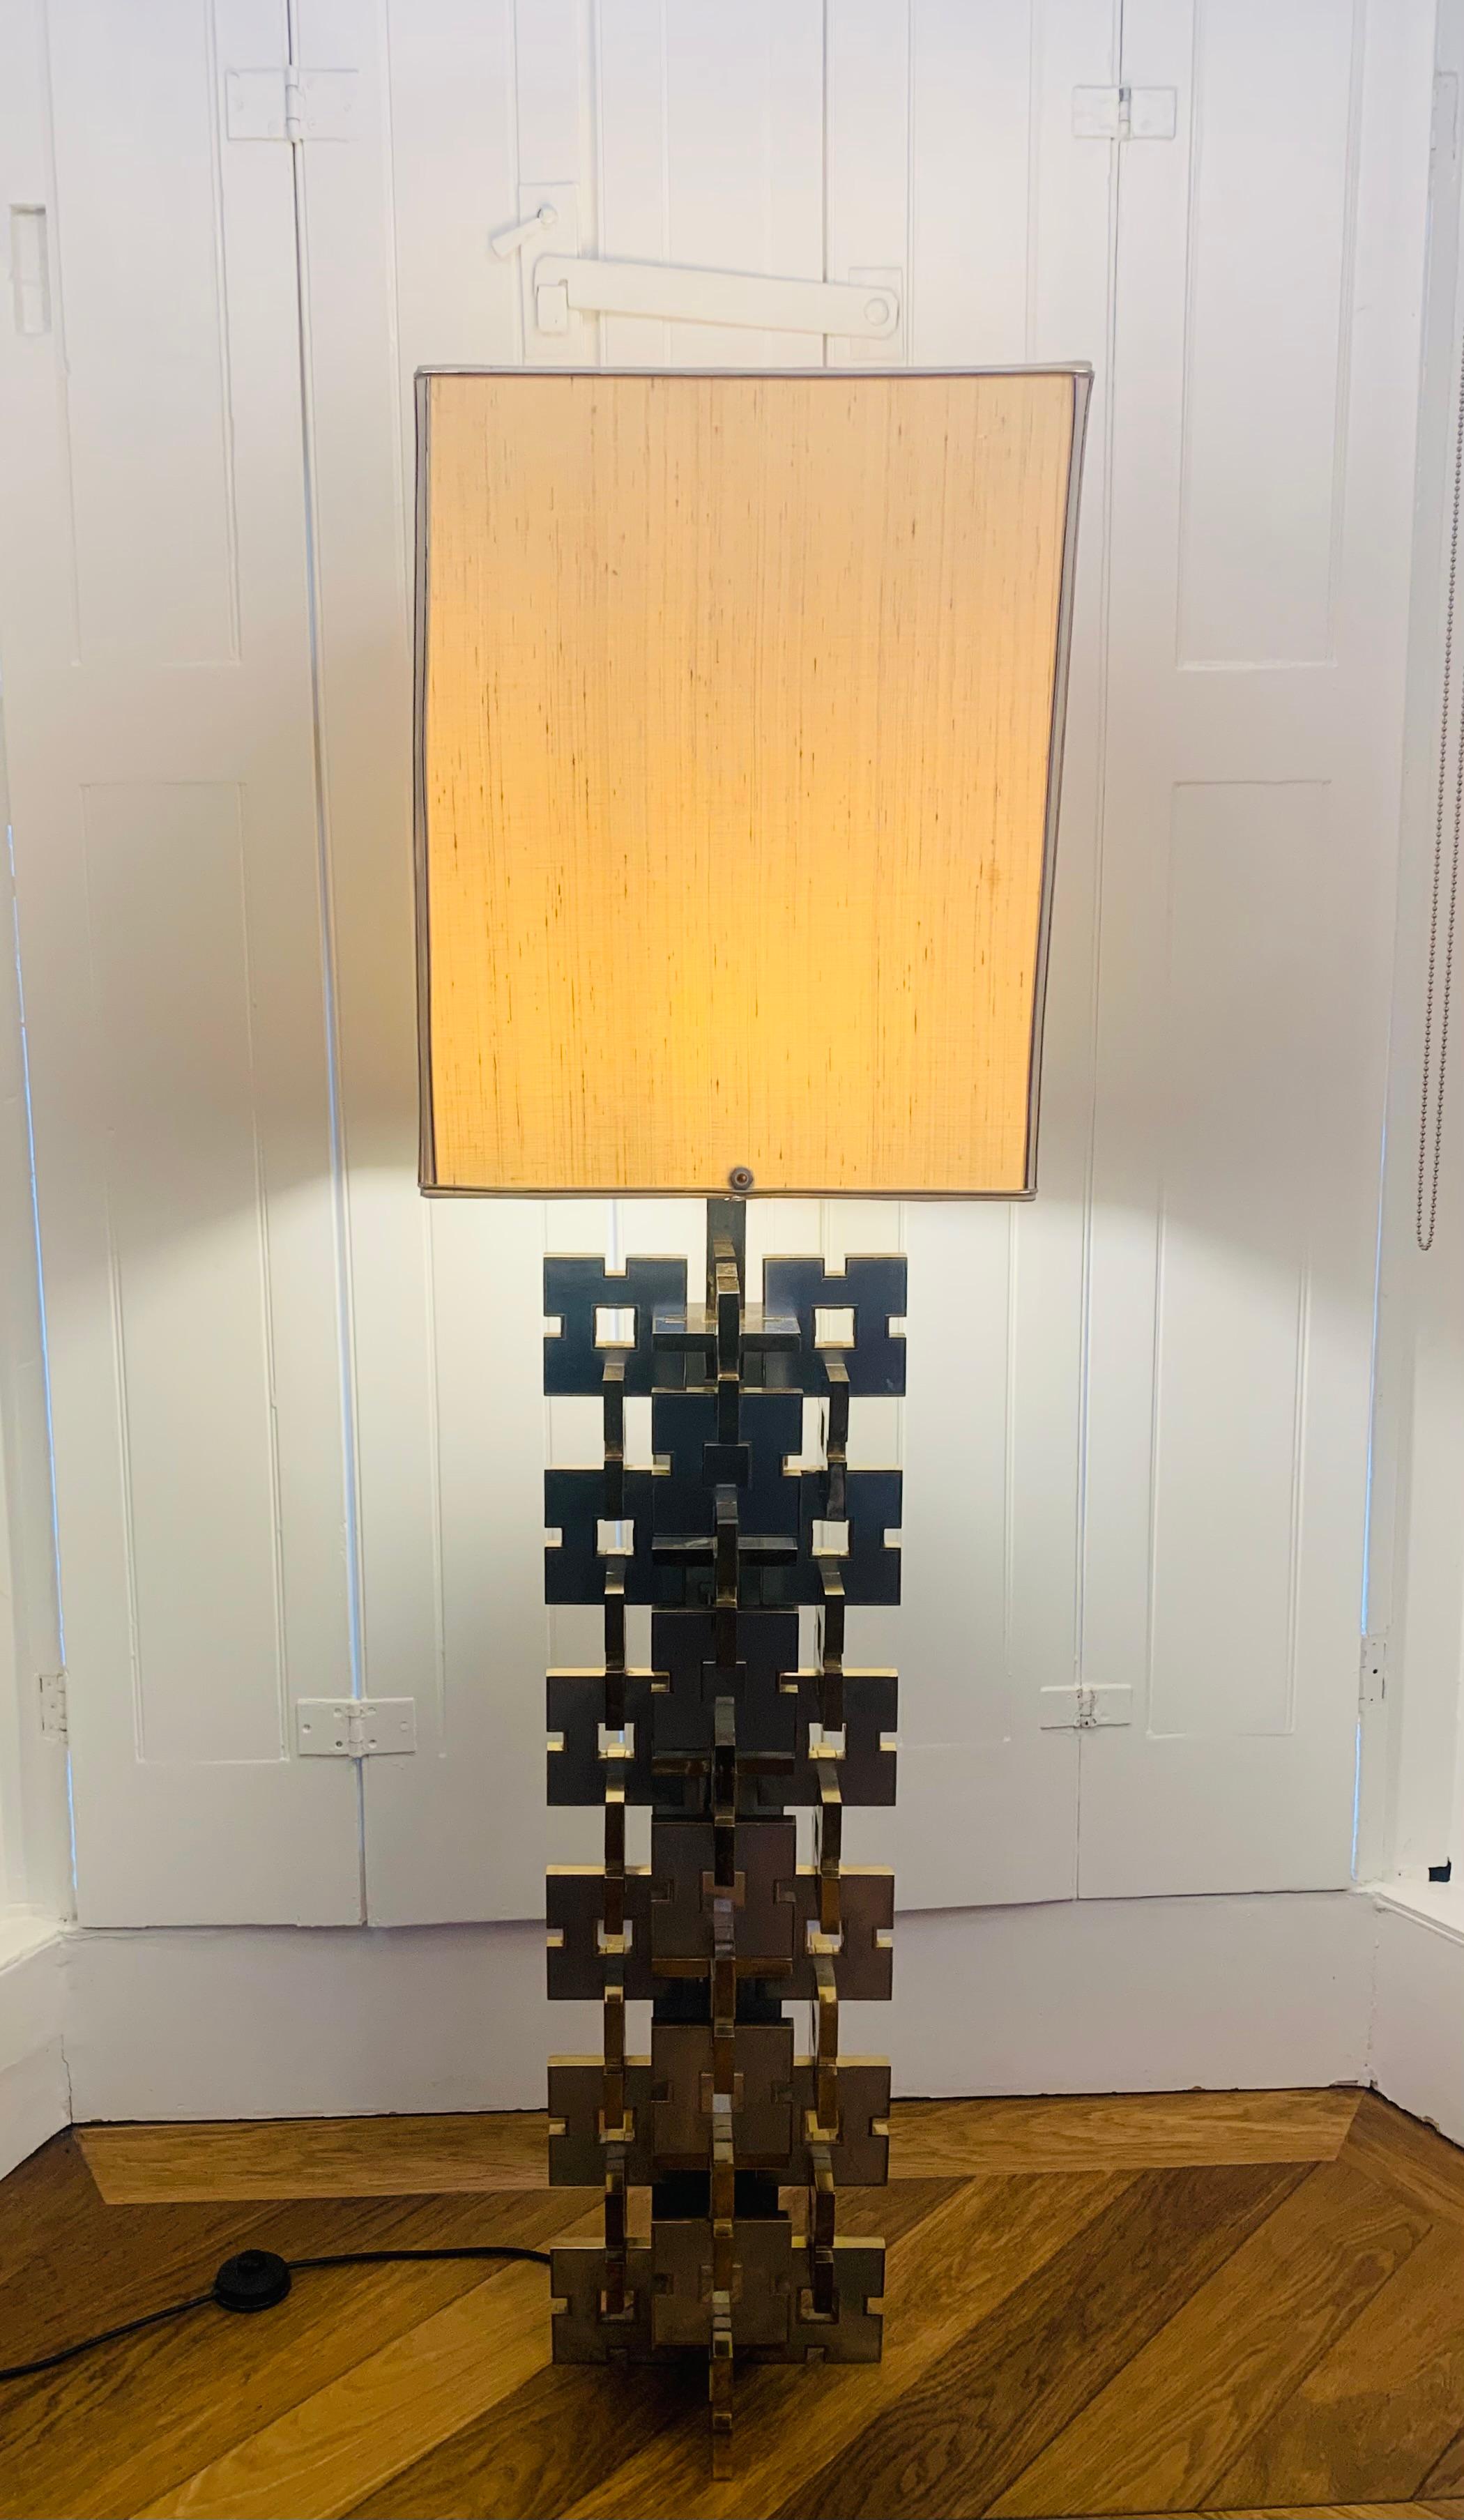 A rare, striking and beautifully designed Italian floor lamp constructed from alternate, interlocking, identical, silver squares with brass edges. This beautiful lamp was designed by Gaetano Sciolari for Sciolari Lighting during the 1970s. The